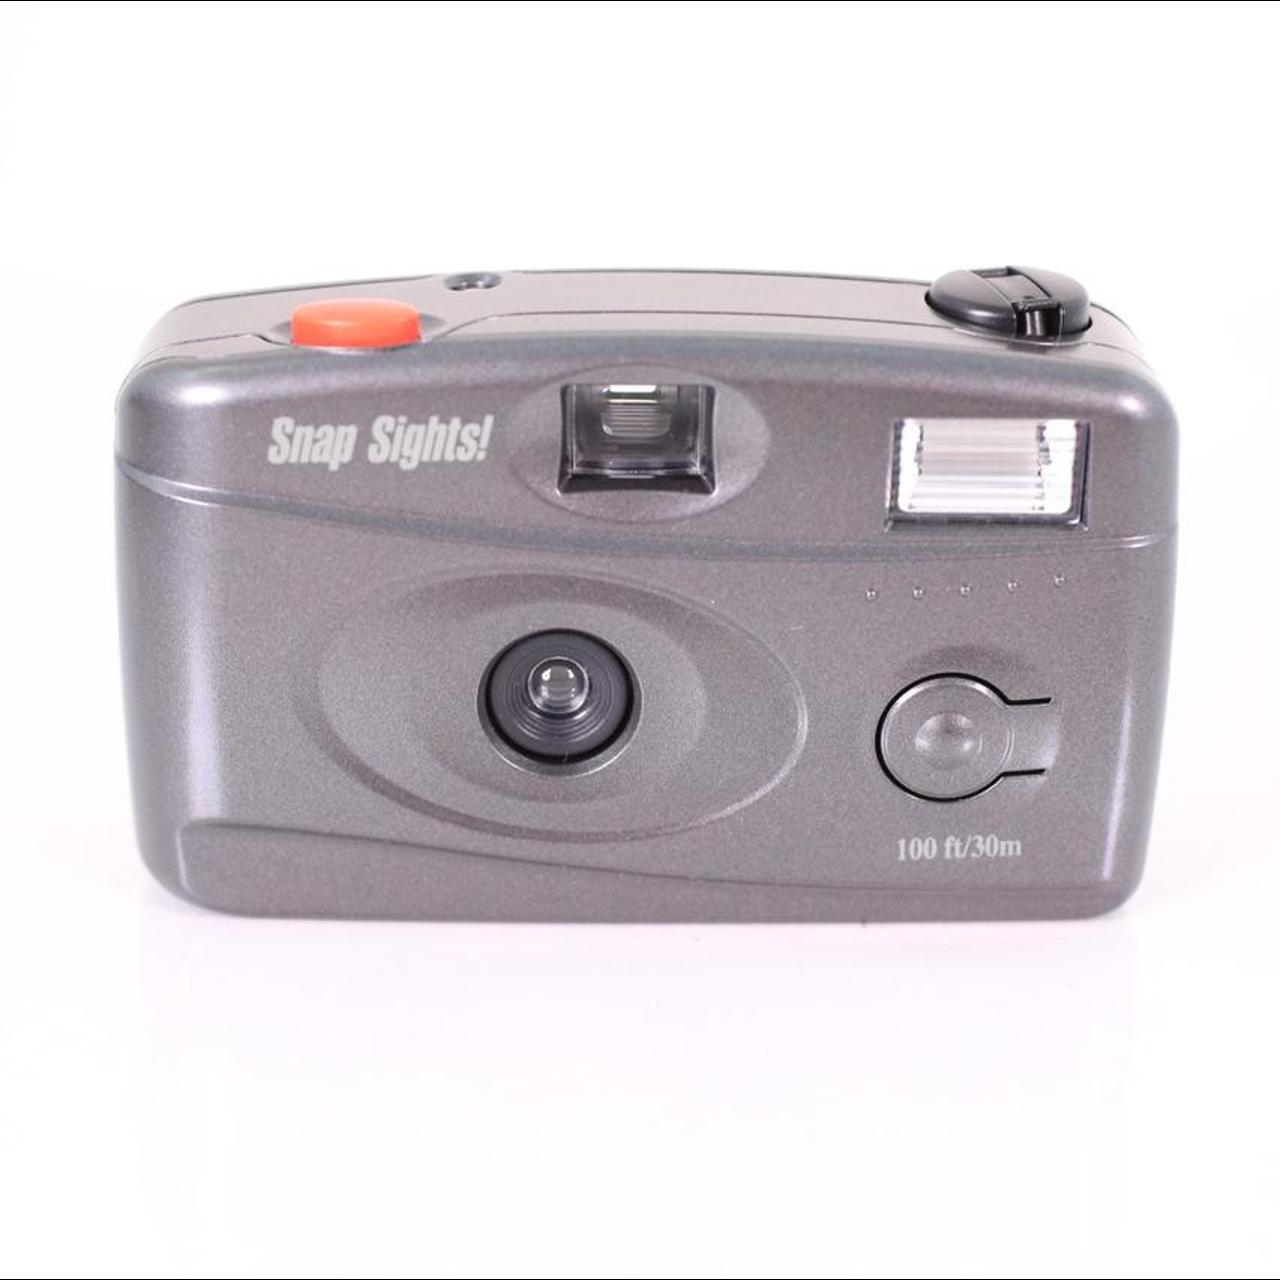 Product Image 4 - Vintage Snap Sights! 35mm underwater